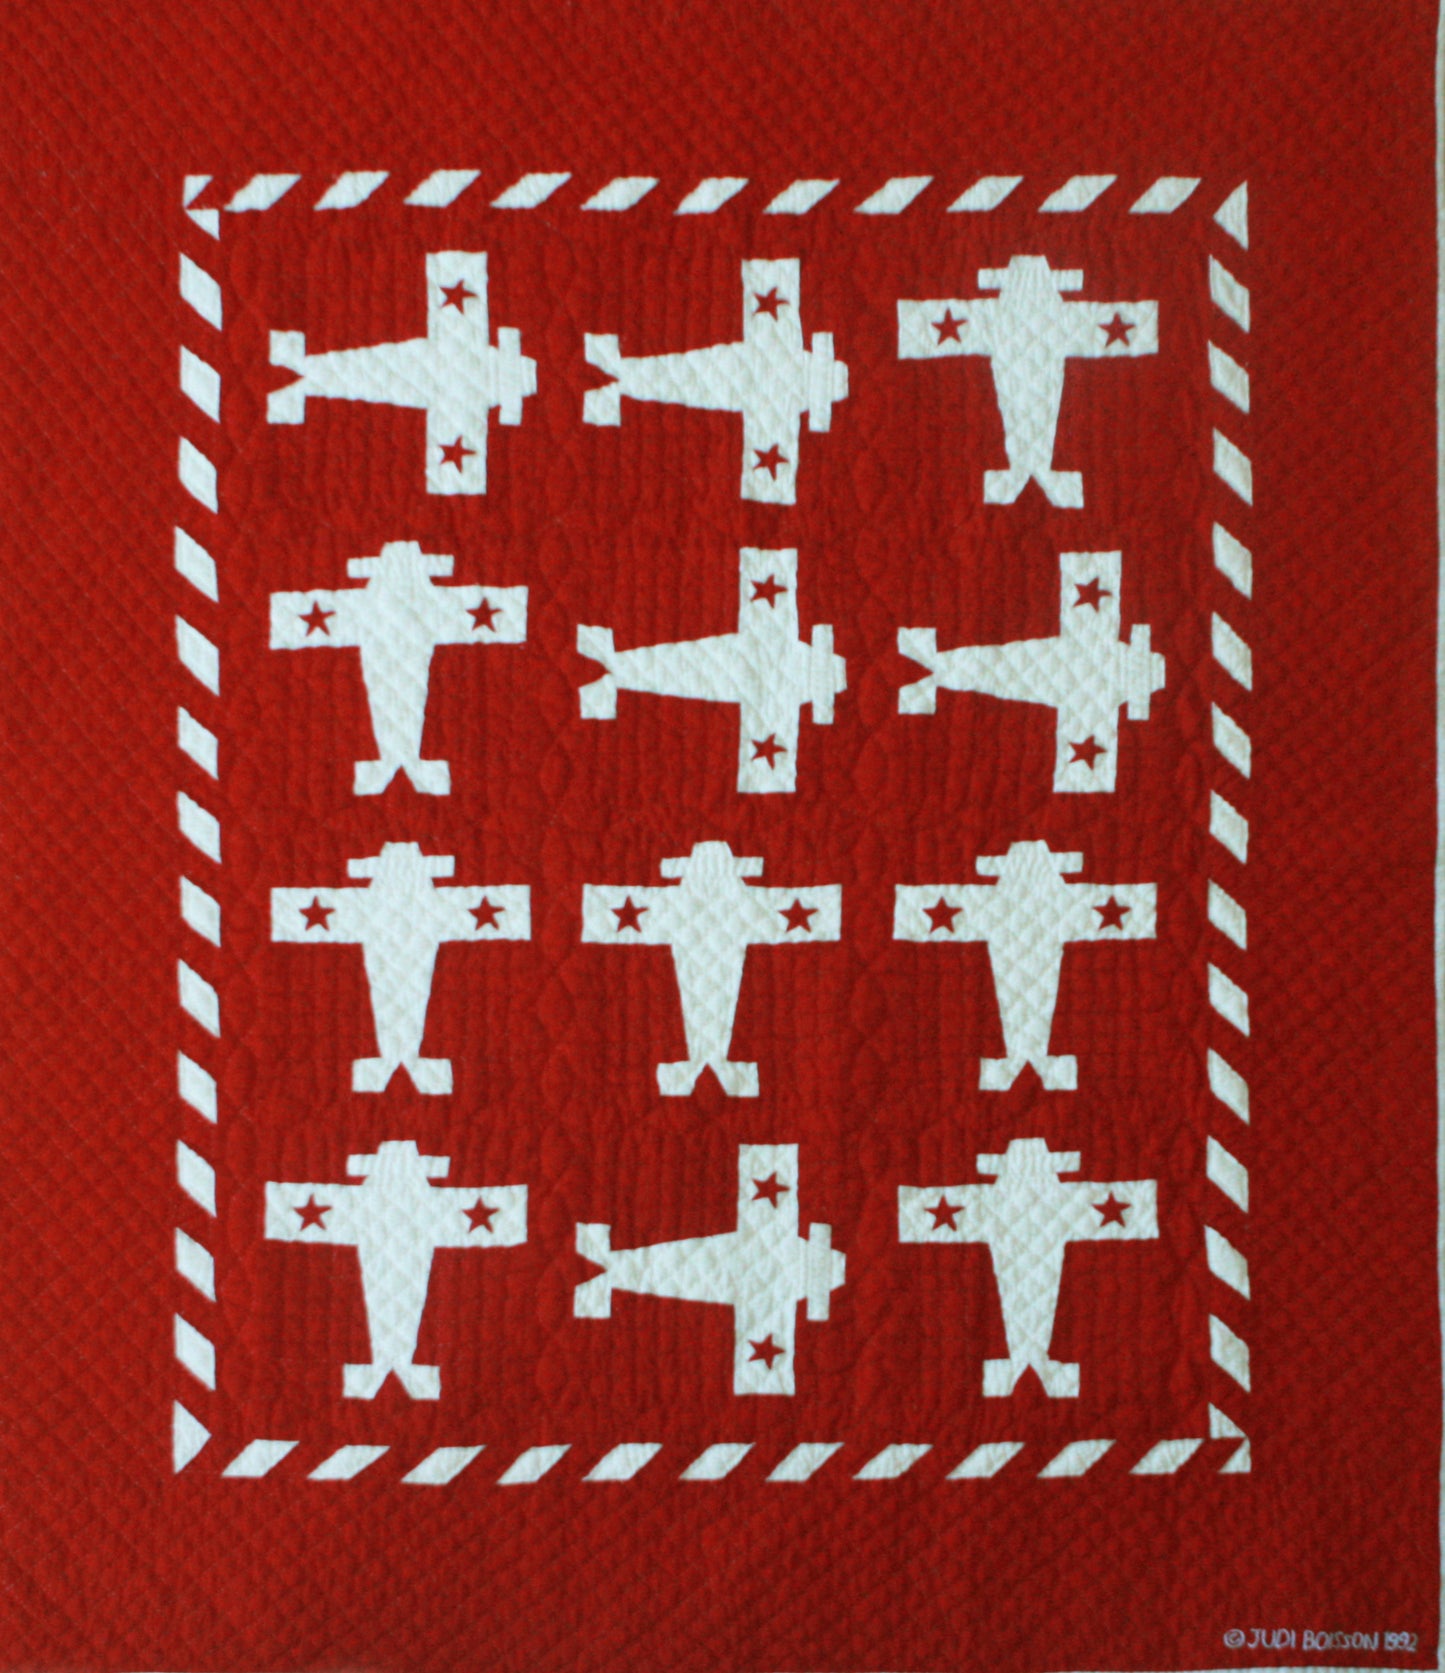 "Airplane" in Red-White Crib Quilt 44" x 55"